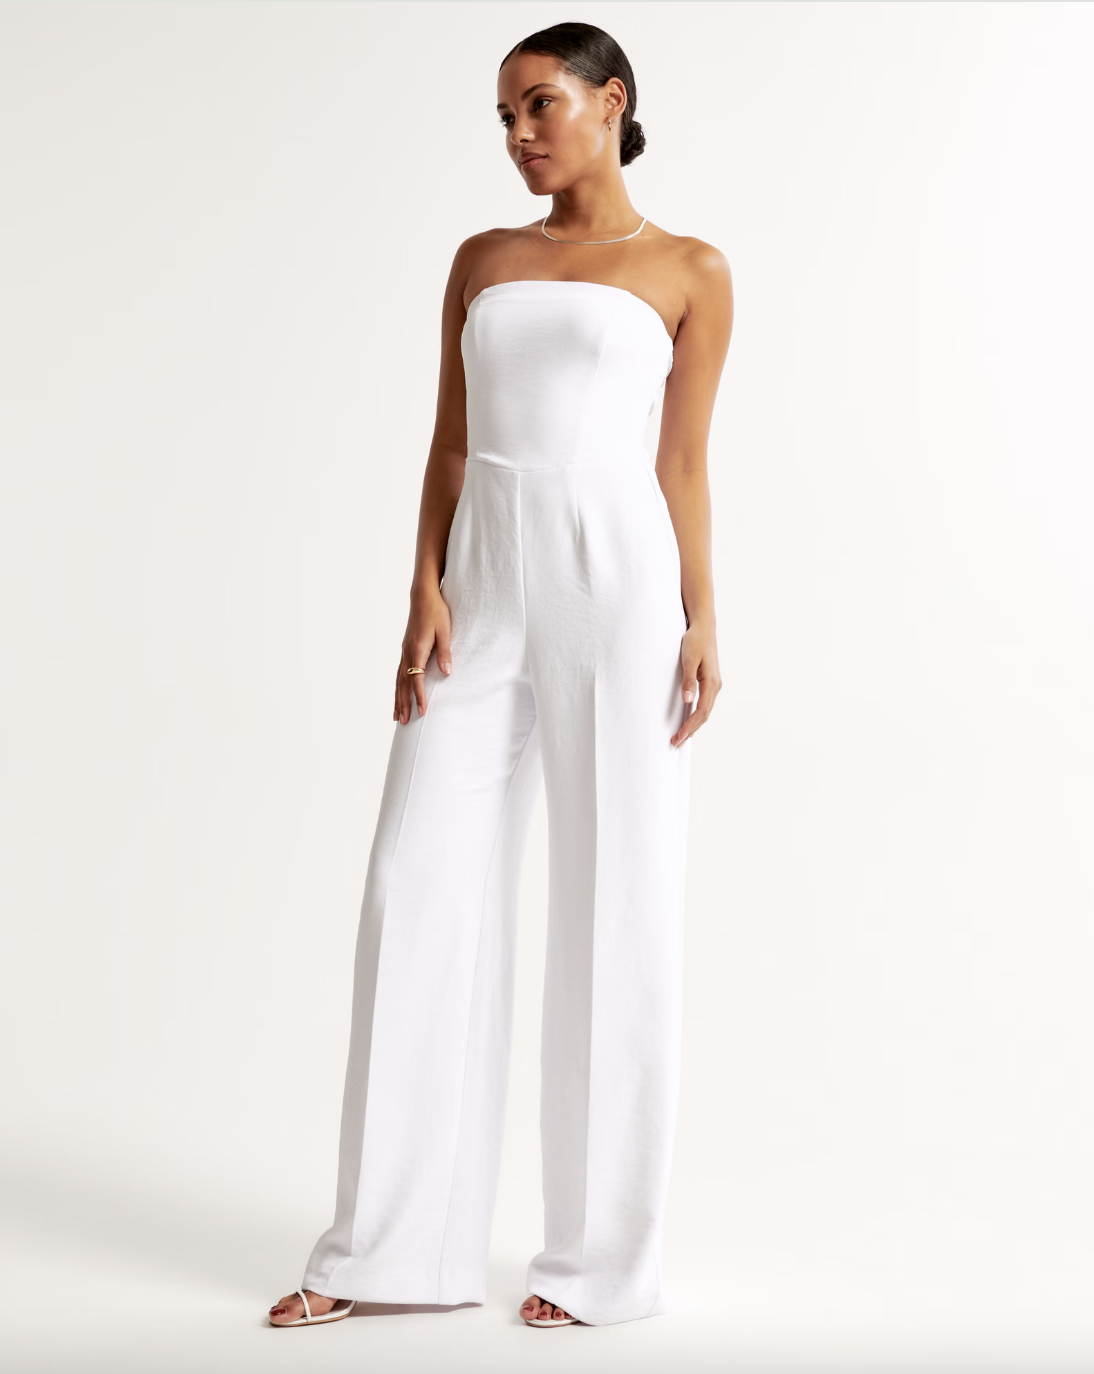 <p><strong>$100.00</strong></p><p><a href="https://www.abercrombie.com/shop/uk/p/strapless-premium-crepe-jumpsuit-53418840">Shop Now</a></p><p>New in at Abercrombie, this wedding jumpsuit is one of the comfiest styles out there. It has corset-style seams and extra wide legs, as well as handy detachable straps so you can switch up your look. We guarantee you'll wear this one post-nuptials too – like, every summer, probs. </p>